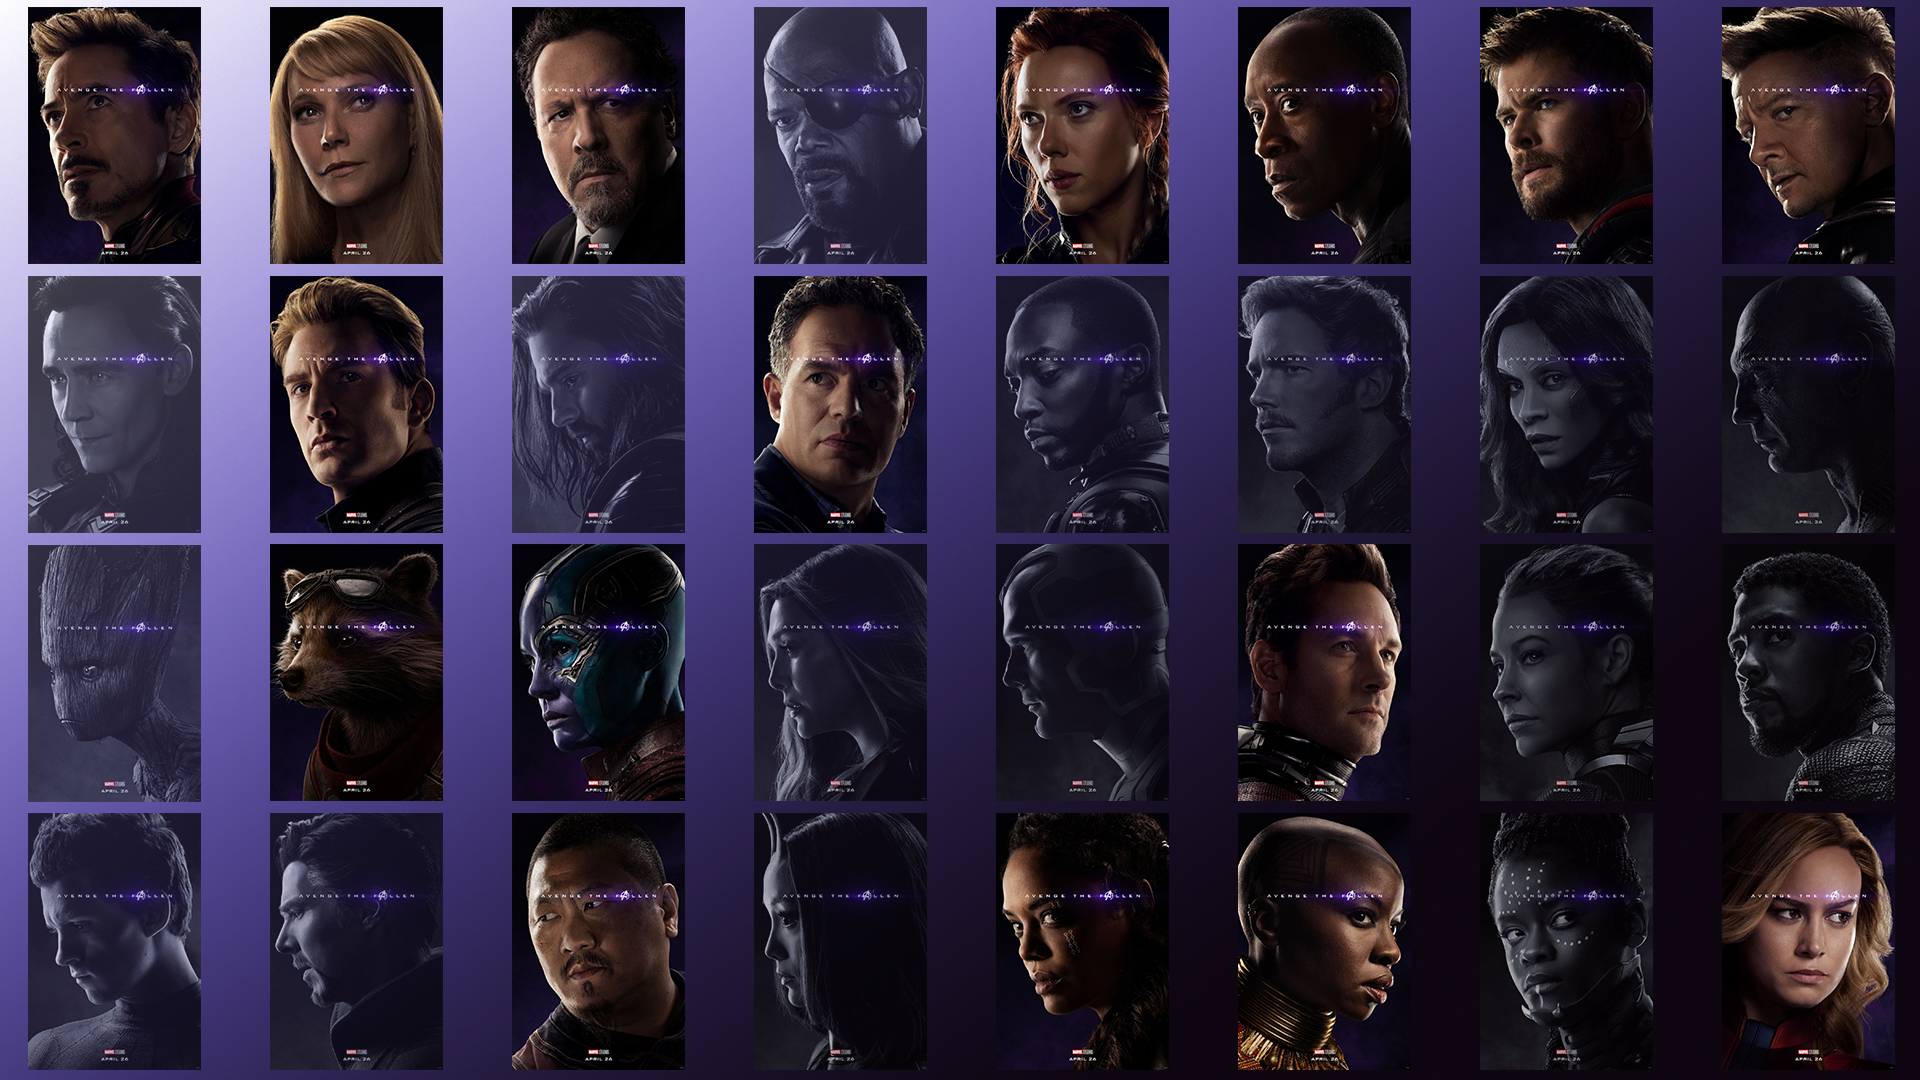 Avengers Endgame Character Posters Wallpaper. 1920x1080 PNG